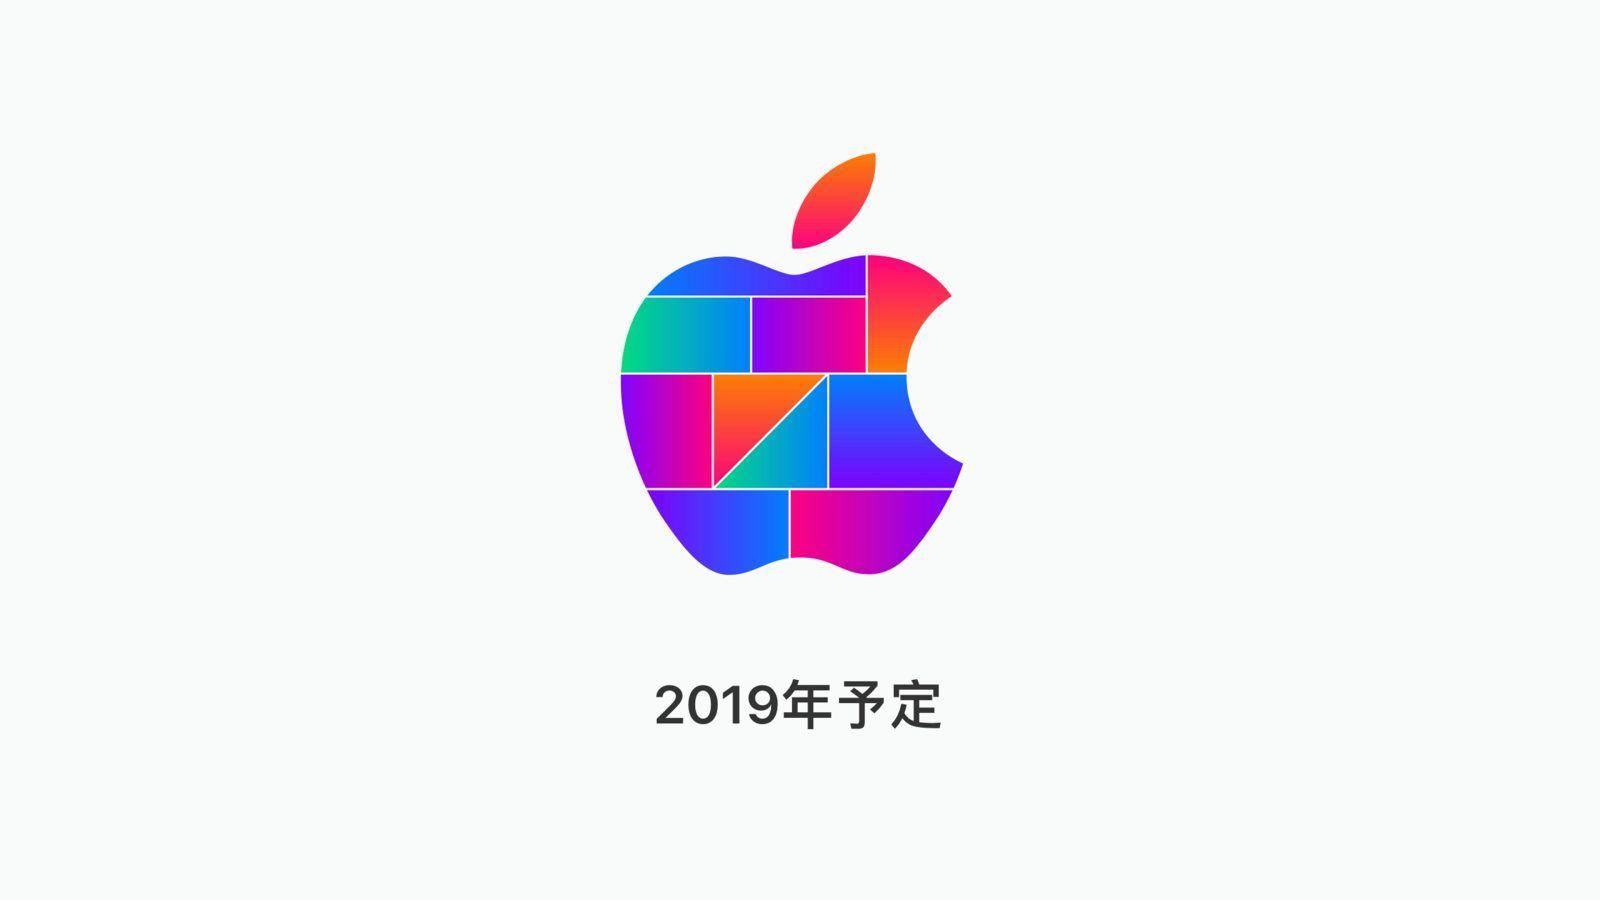 Apple teases new Japanese retail store for promotes Shibuya